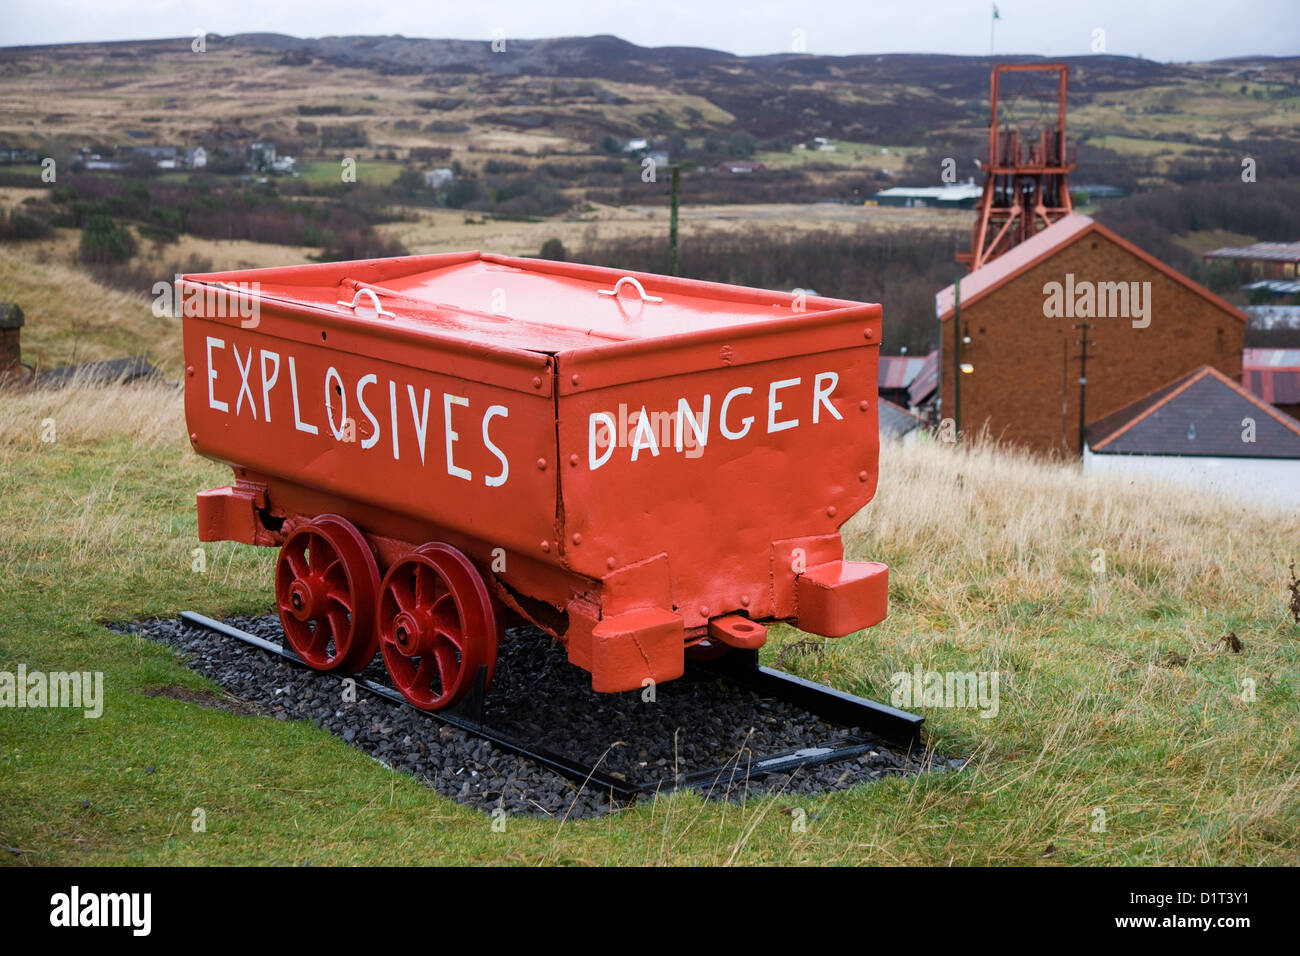 A coal truck carrying explosives at the Big Pit Mining Museum, Blaenavon, Wales Stock Photo